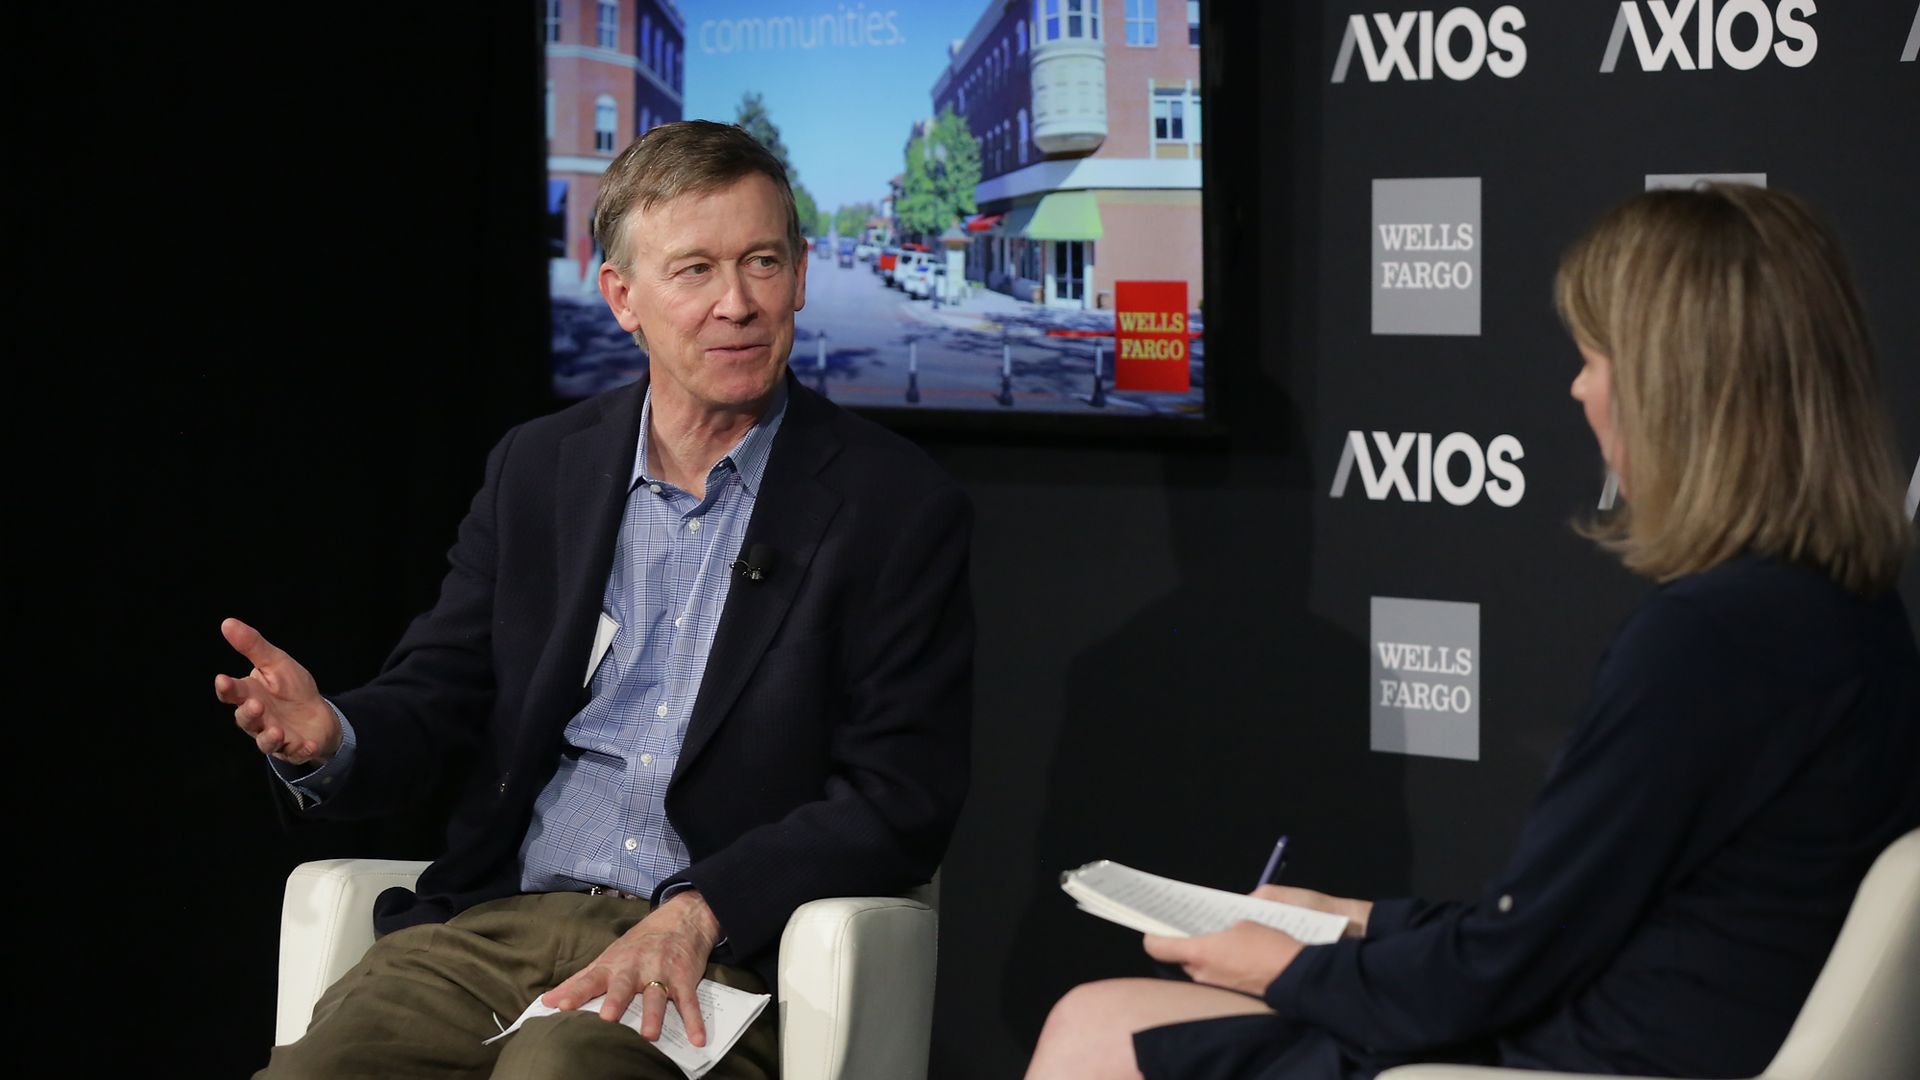 Colorado Governor John Hickenlooper speaks at an Axios event on August 24th